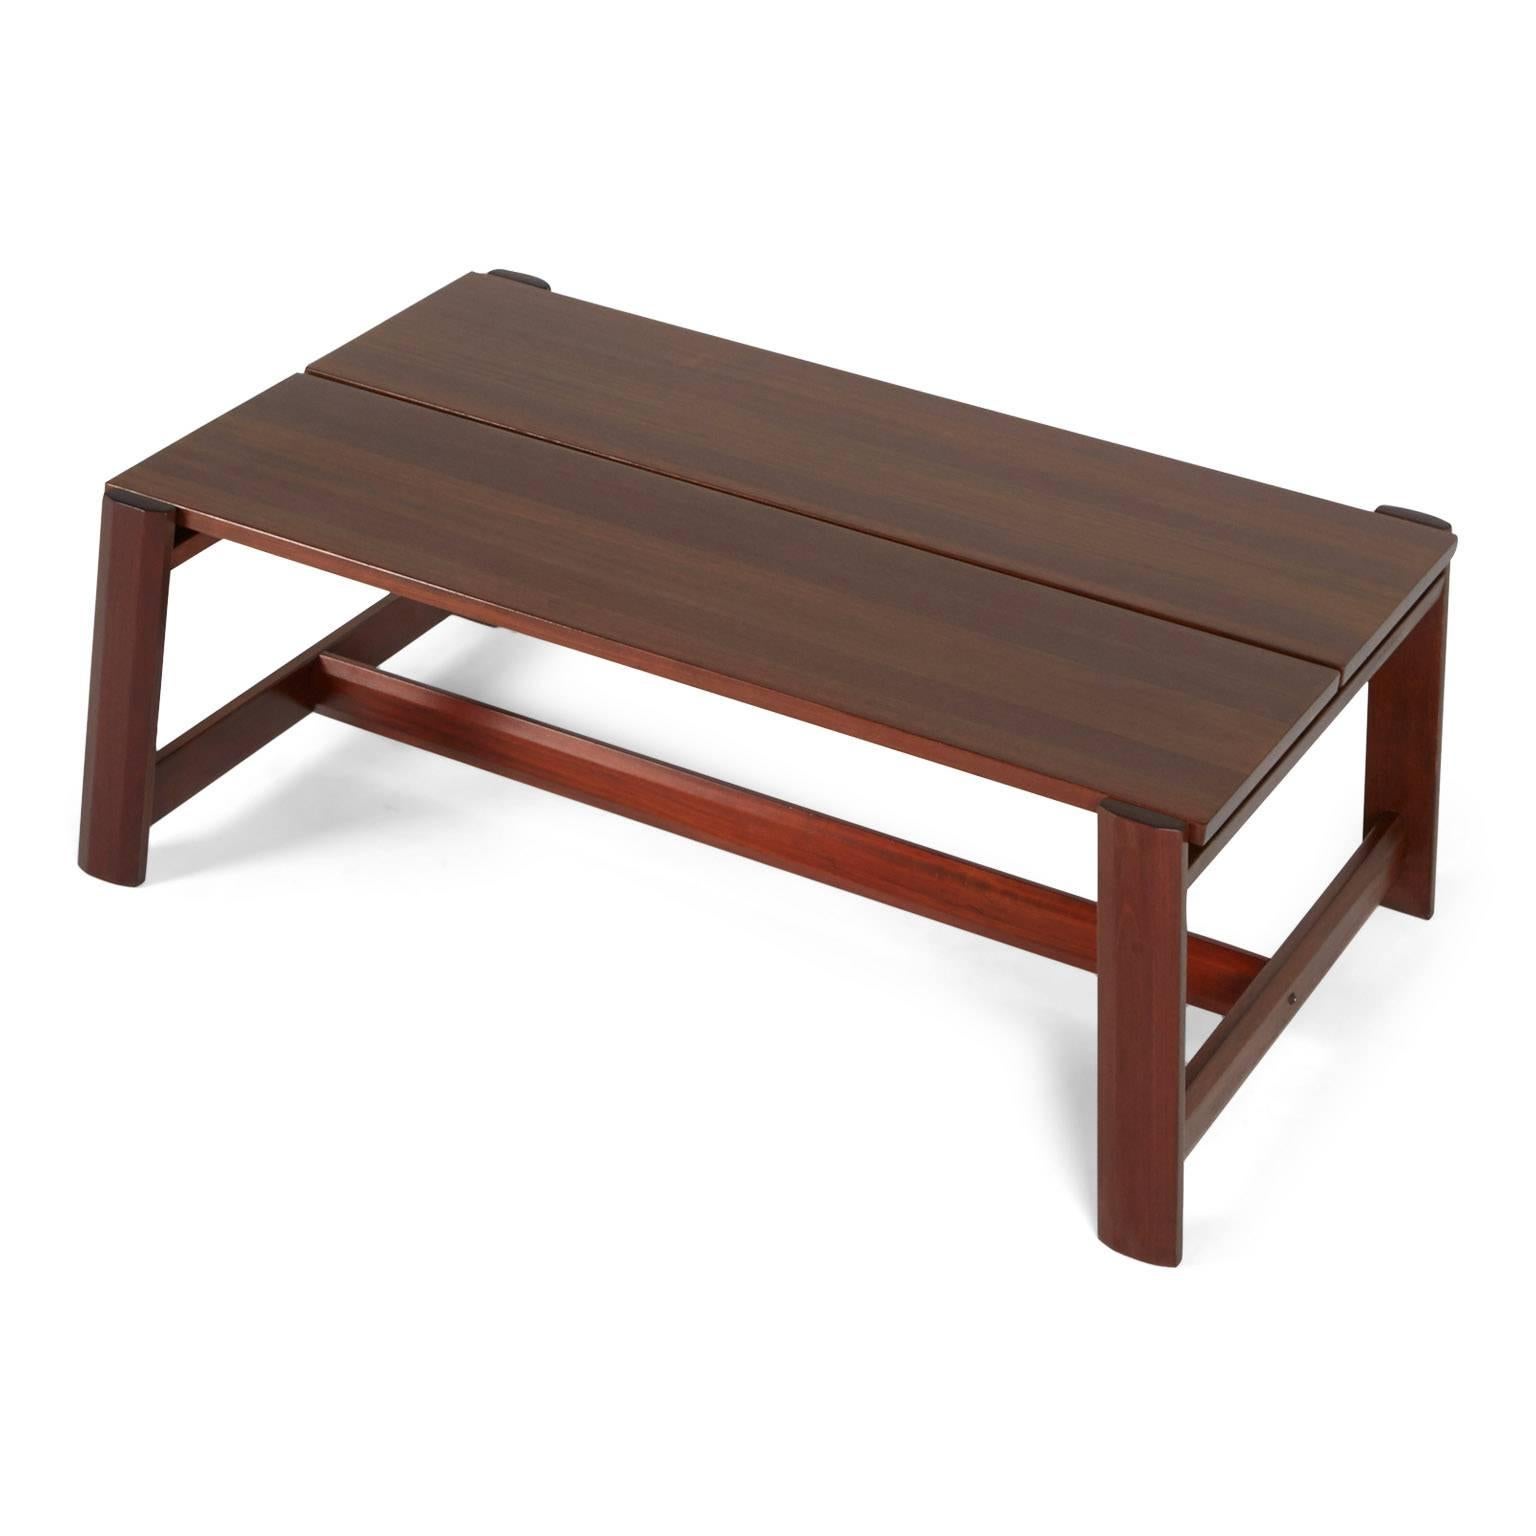 Designed by Sergio Rodrigues for Oca Brazil, this rich, expansive mahogany table would be a solid addition to your living room. The versatile finish is suited to complement a range of decor styles such as Brazilian modern, contemporary, mission and